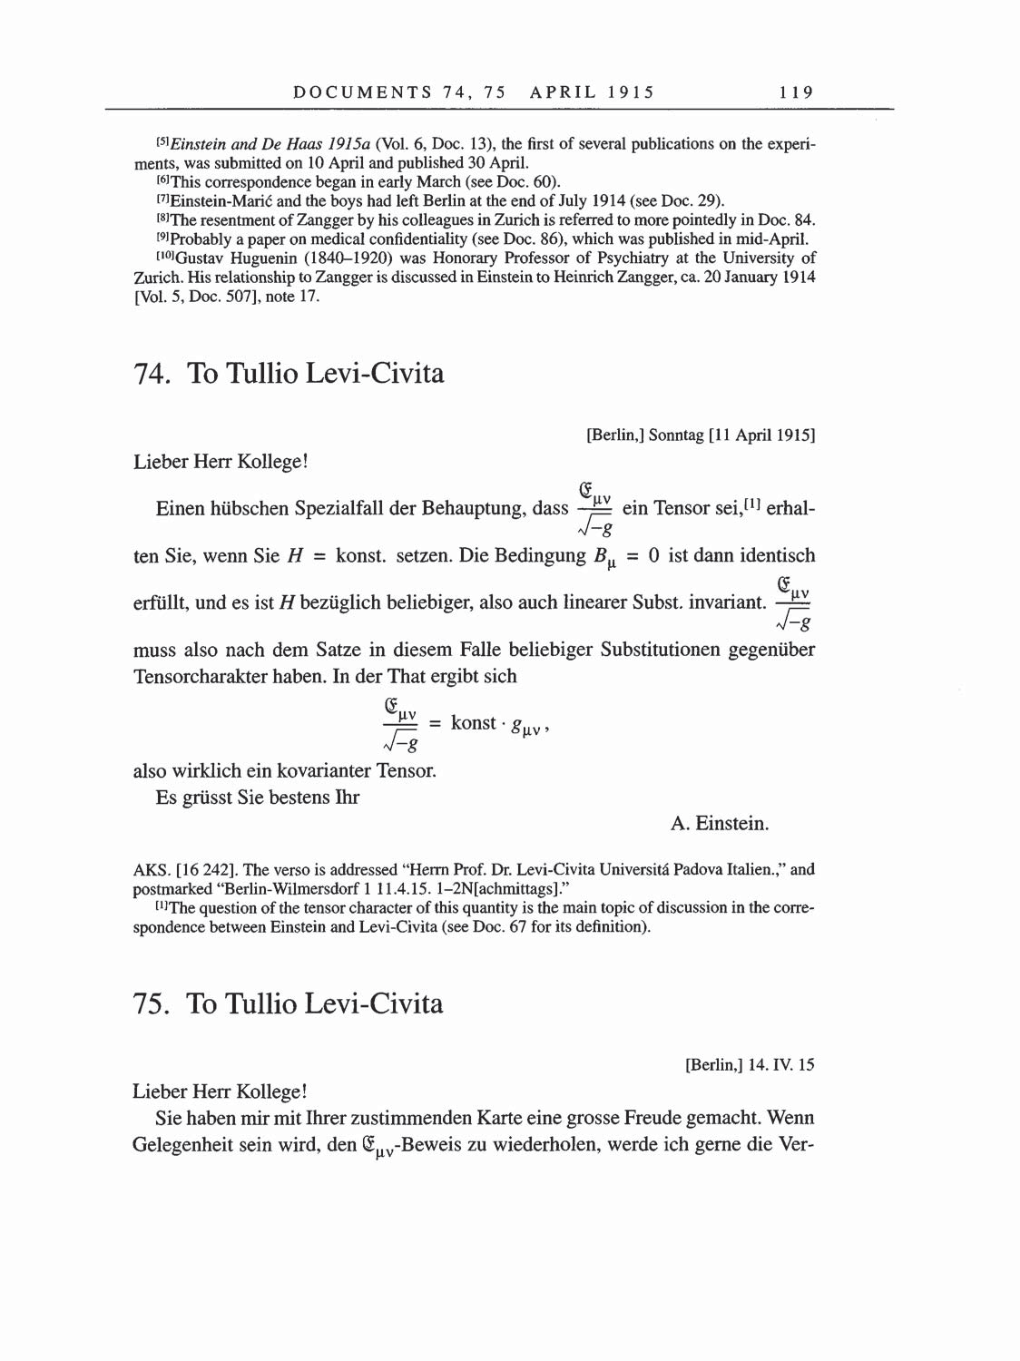 Volume 8, Part A: The Berlin Years: Correspondence 1914-1917 page 119